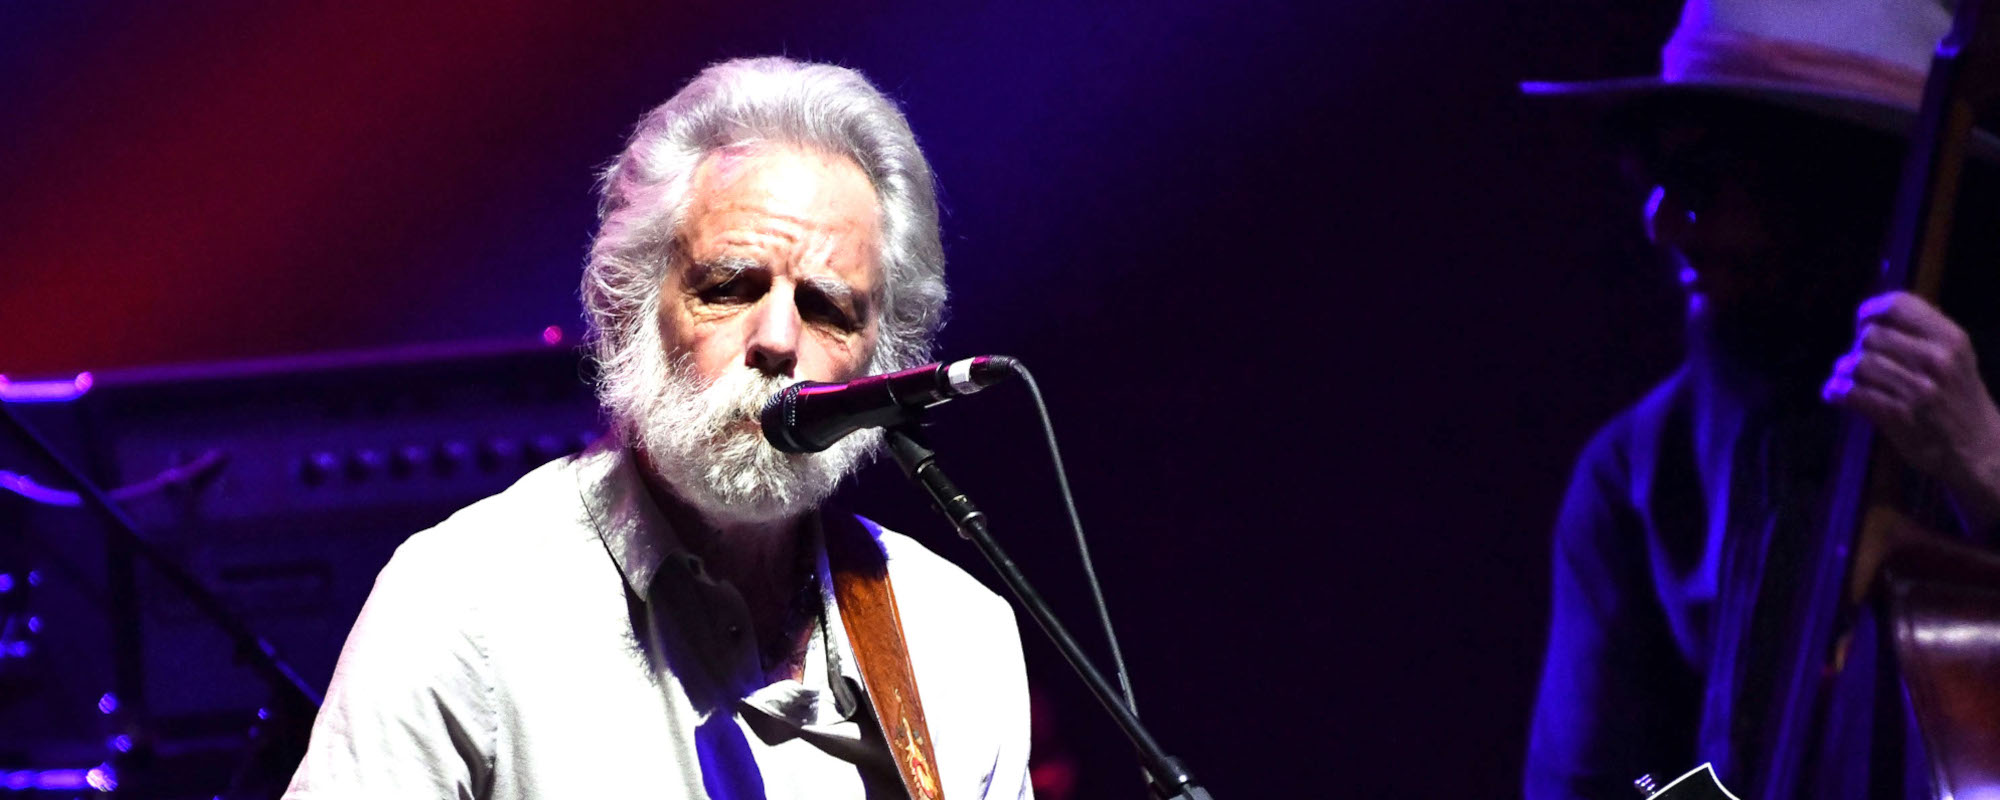 Bob Weir, Sturgill Simpson and More Set for Grateful Dead Collaborative Concert Event